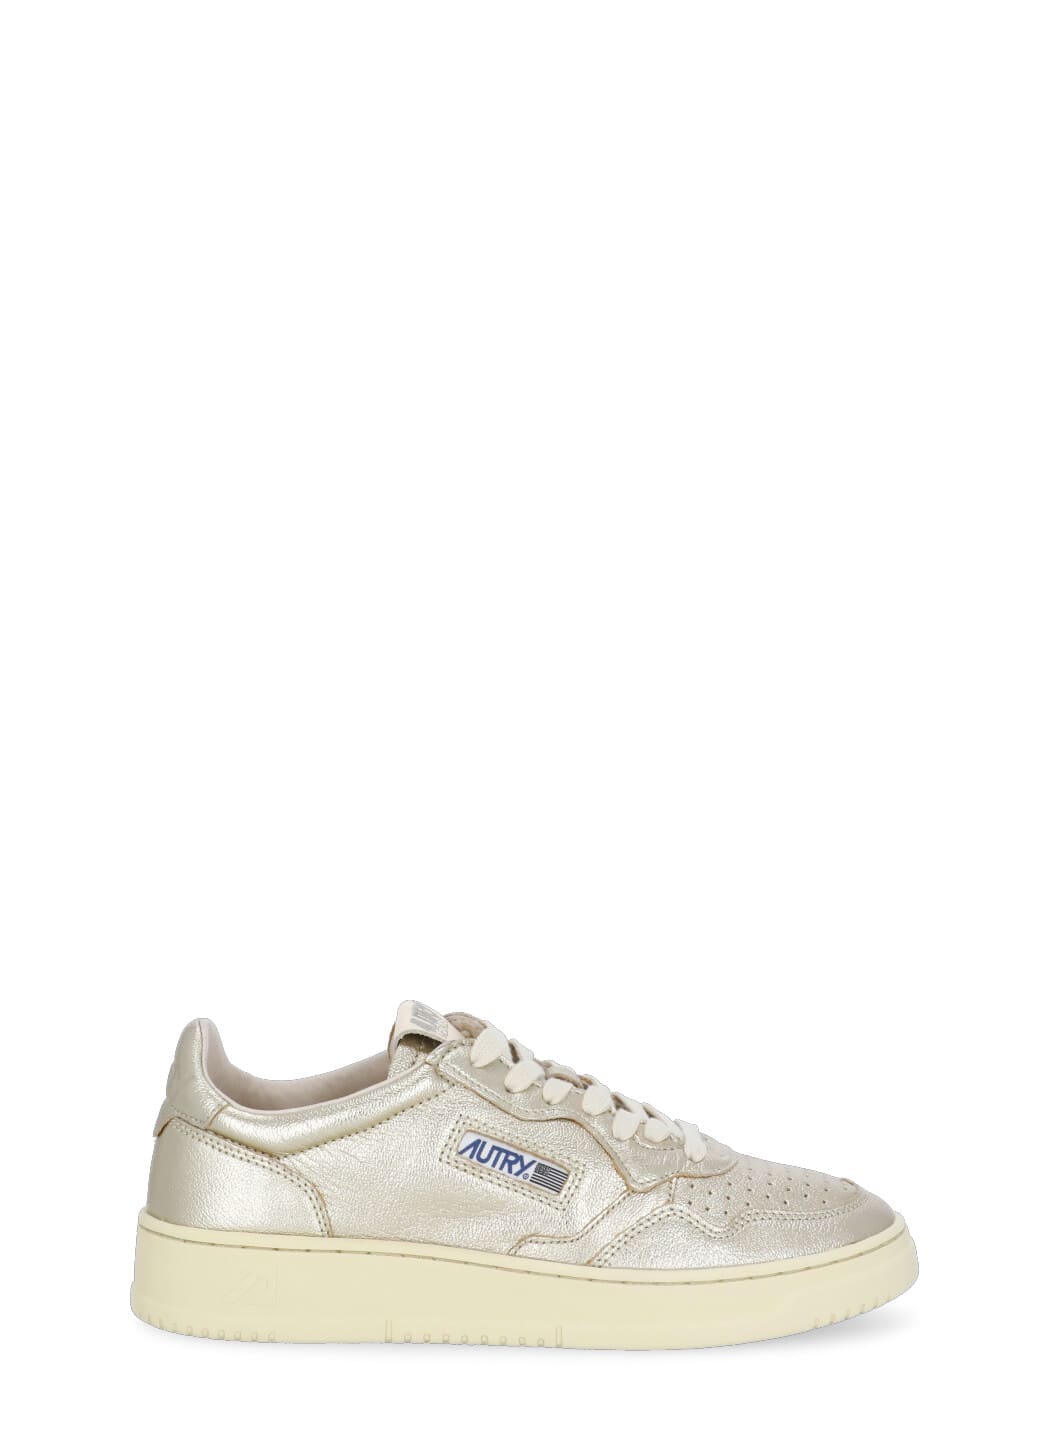 Autry Medalist Low Platino Sneakers